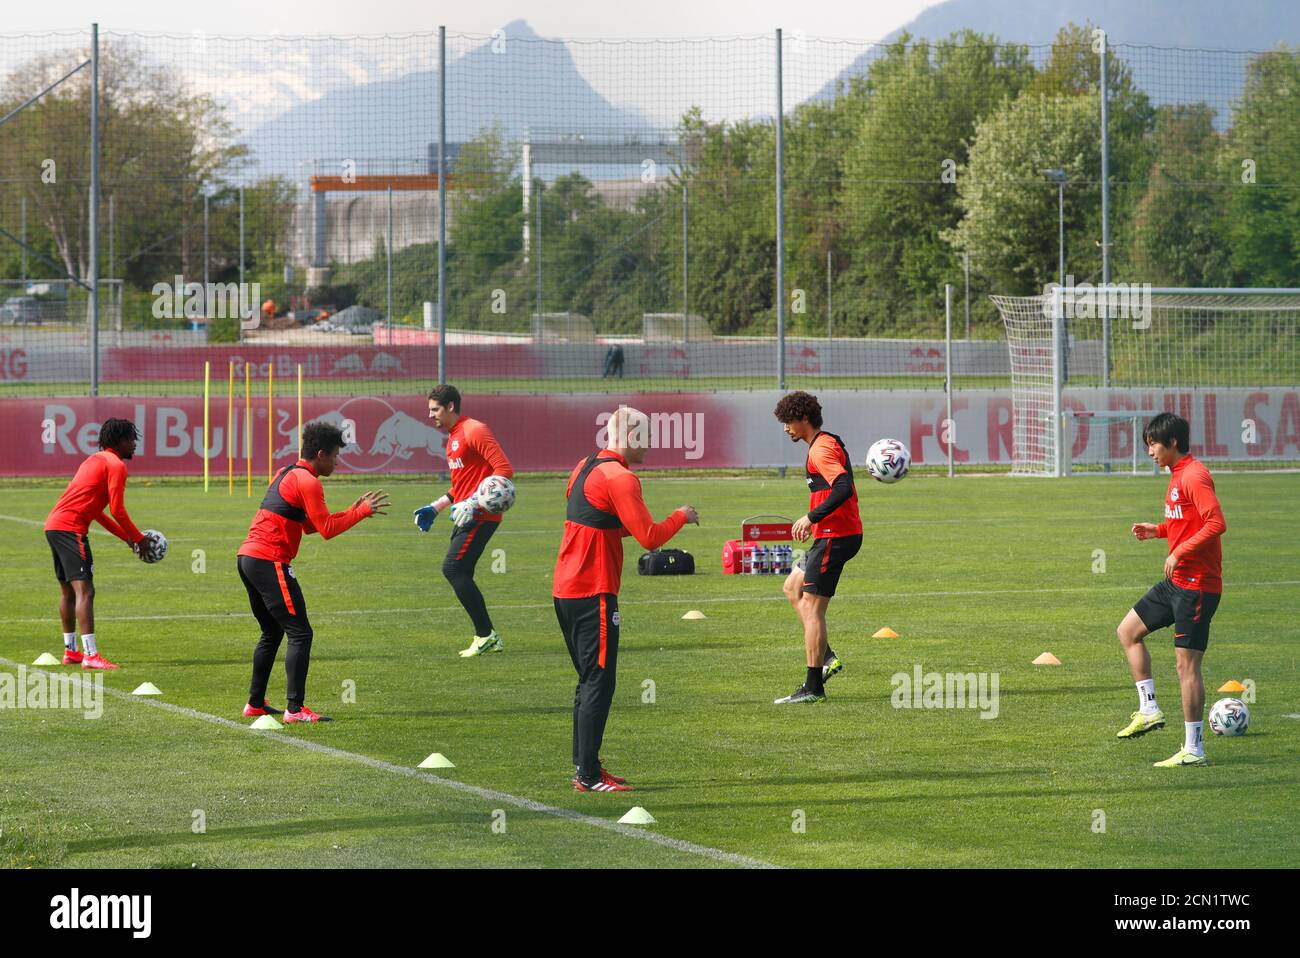 Soccer Football - Red Bull Salzburg Training - Red Bull Trainingszentrum, Salzburg, Austria - April 21, 2020 Red Bull Salzburg players during training despite most sport being cancelled around the world as the spread of coronavirus disease (COVID19) continues. REUTERS/Leonhard Foeger Stock Photo